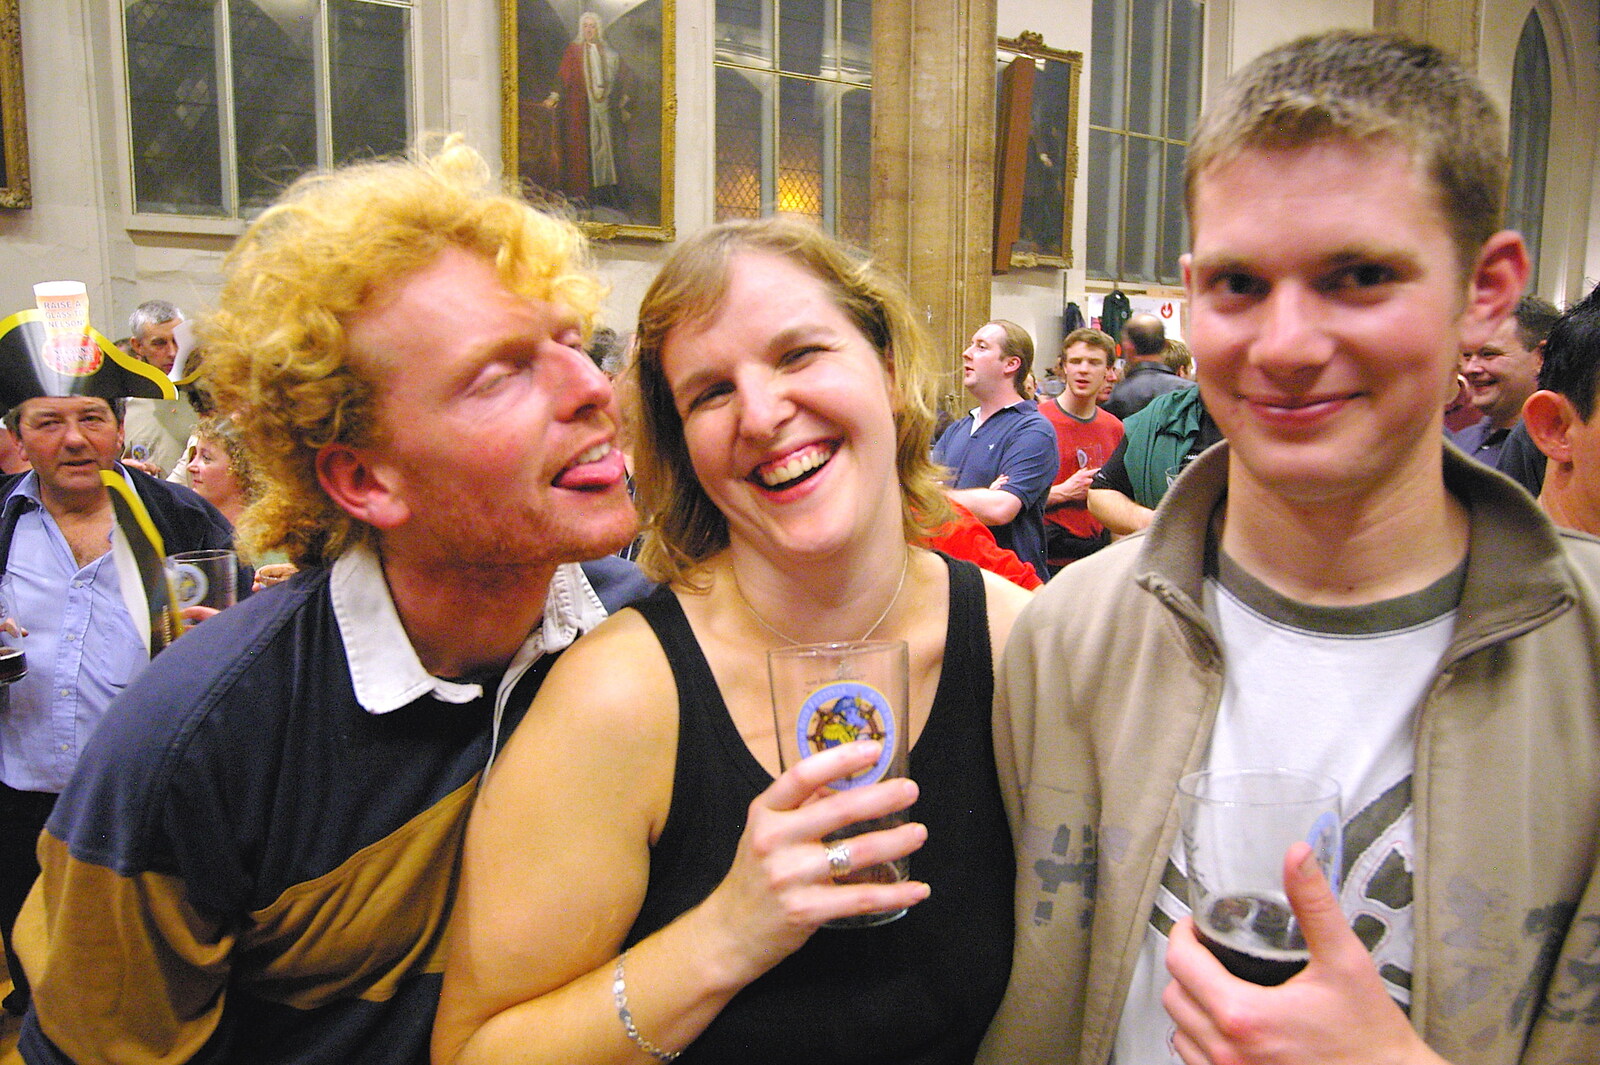 Wavy licks Sarah's ear from The 28th Norwich Beer Festival, St. Andrew's Hall, Norwich - 26th October 2005